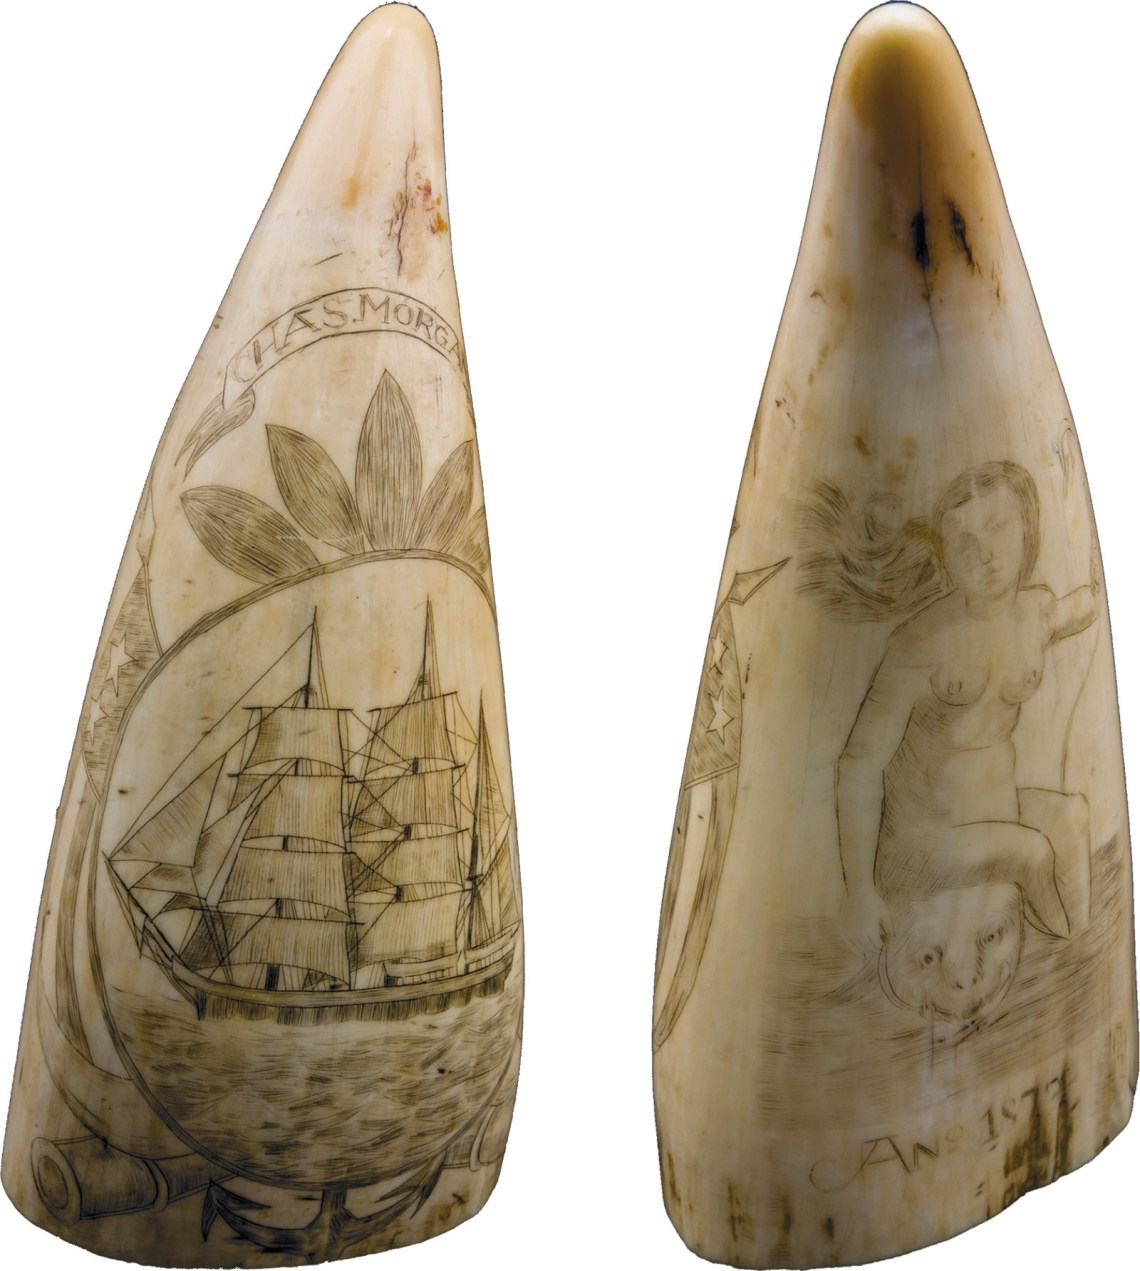 A scrimshaw tooth showing a sailing ship, a woman and sea monster, 1879